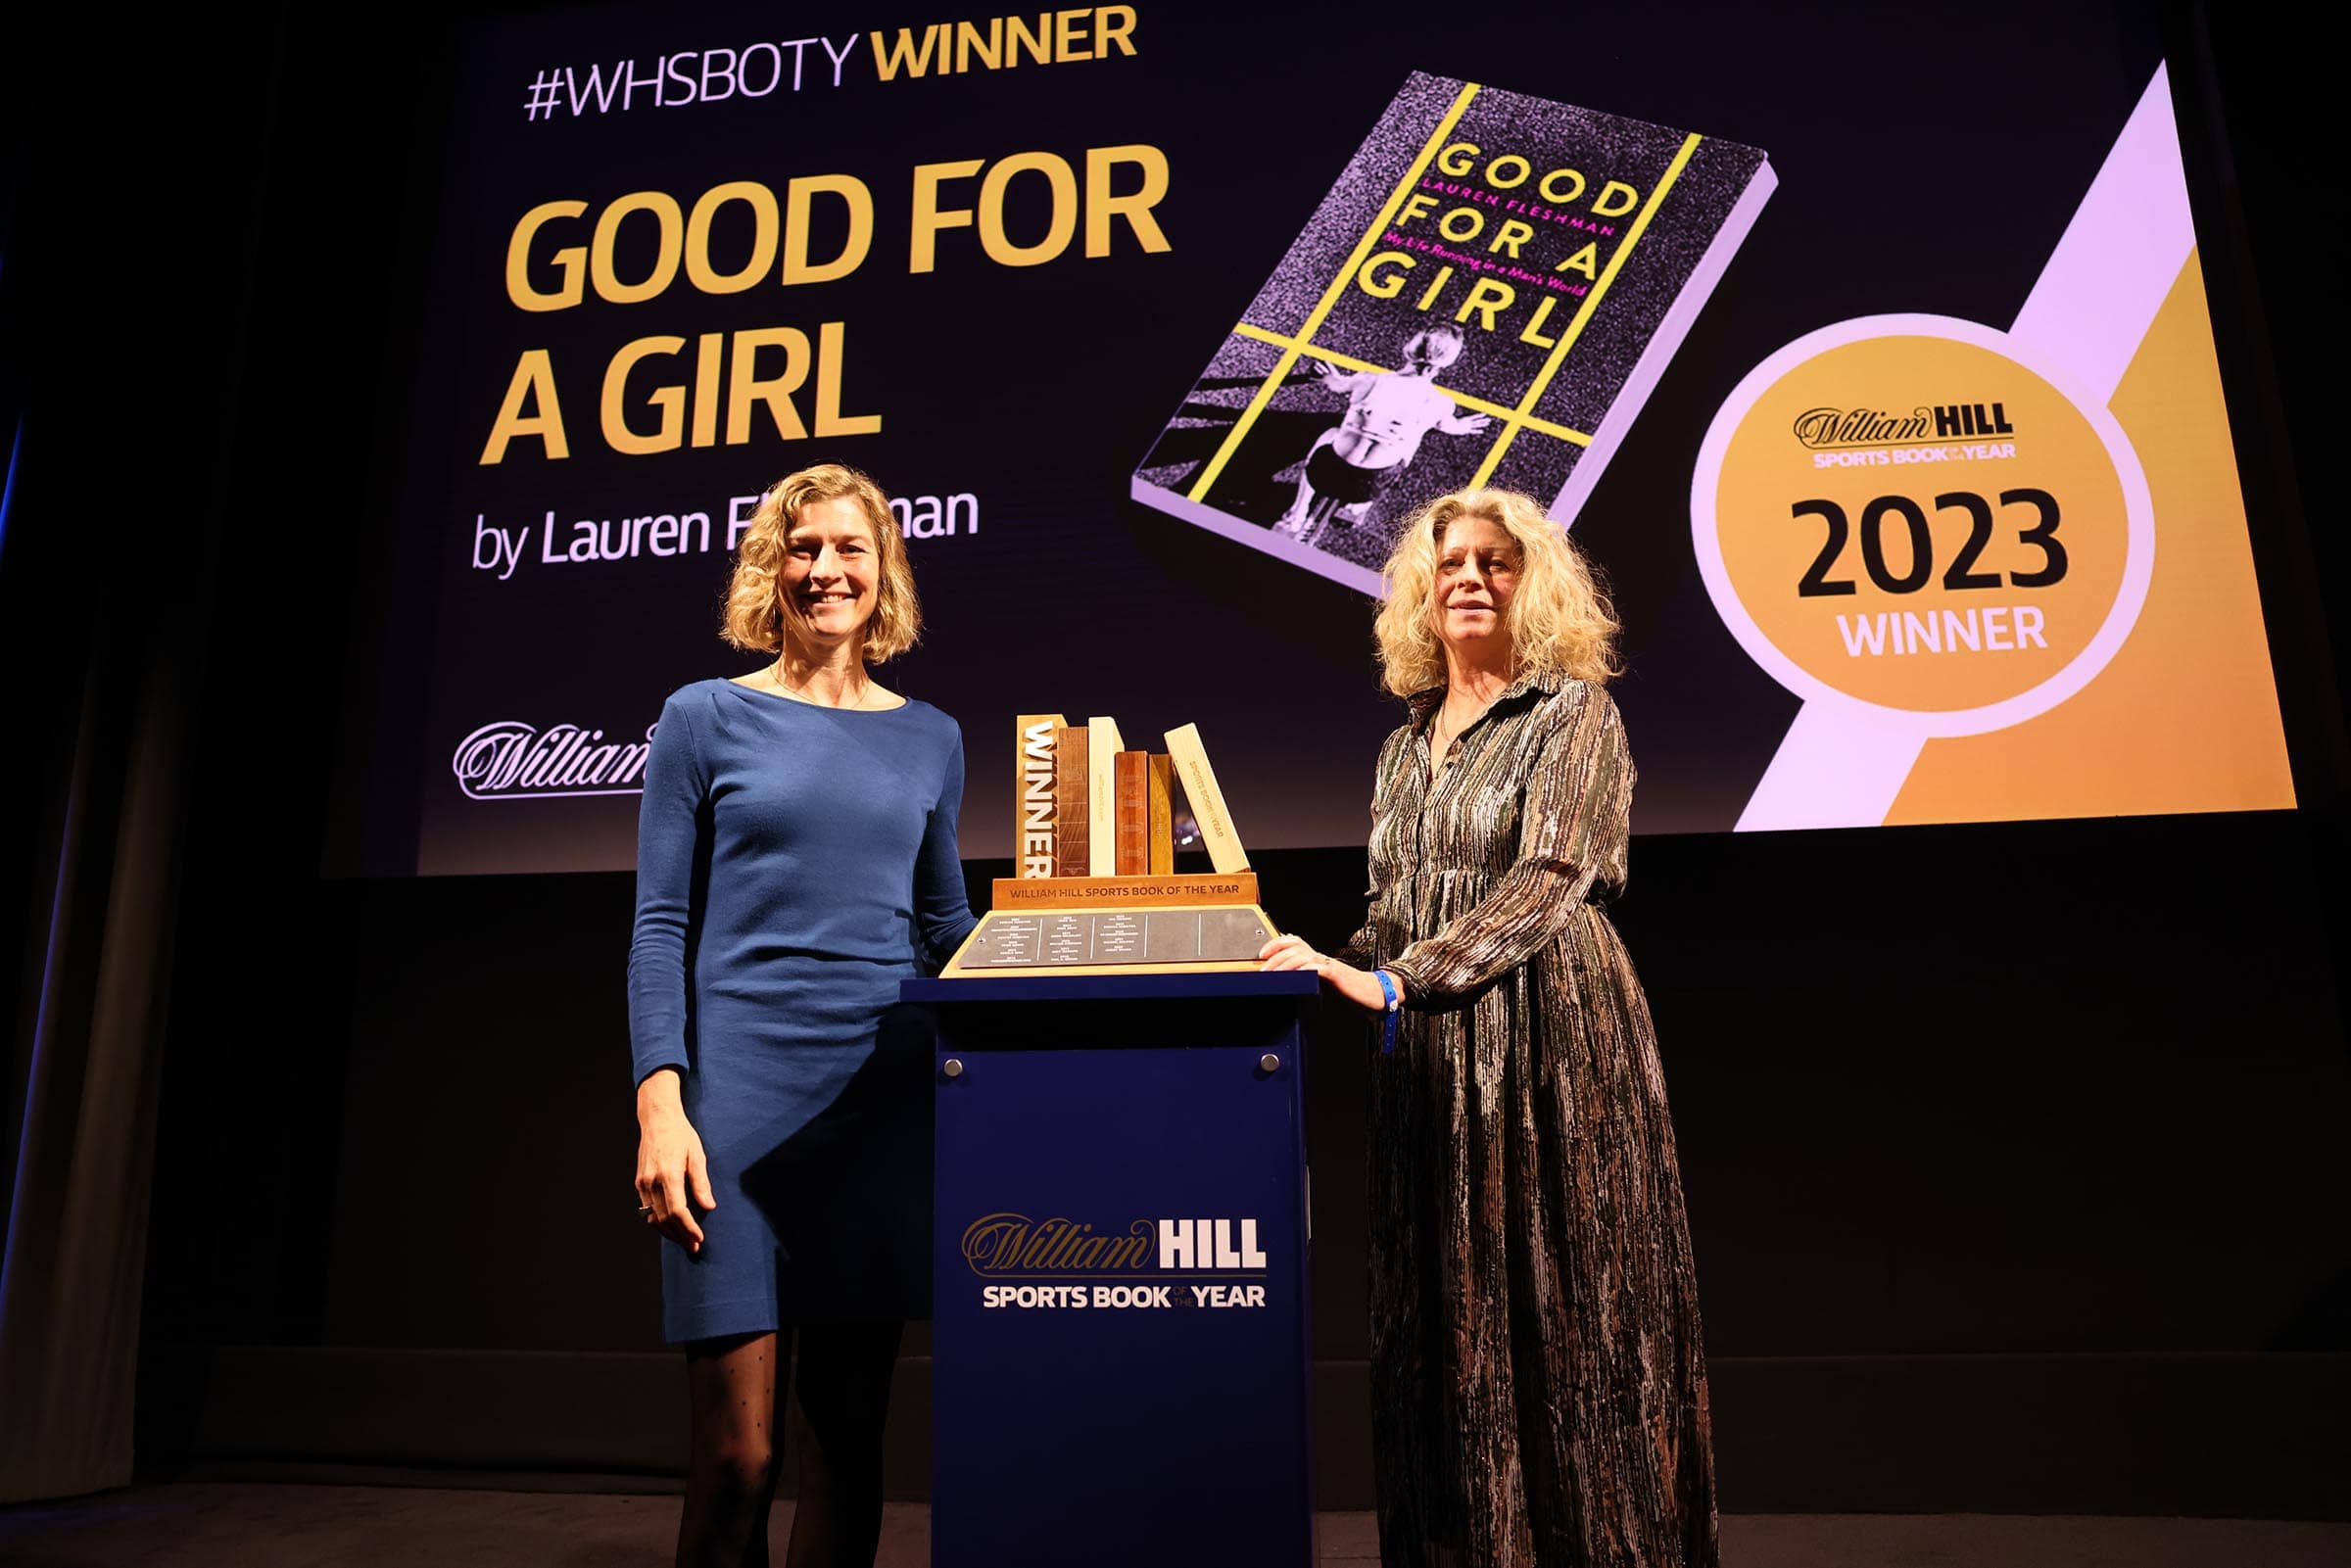 Lauren Fleshman, left, receives the 2023 William Hill Sports Book of the Year Award from chair Alyson Rudd. She wins a £30,000 prize for her book, Good for a Girl My Life Running in a Man’s World